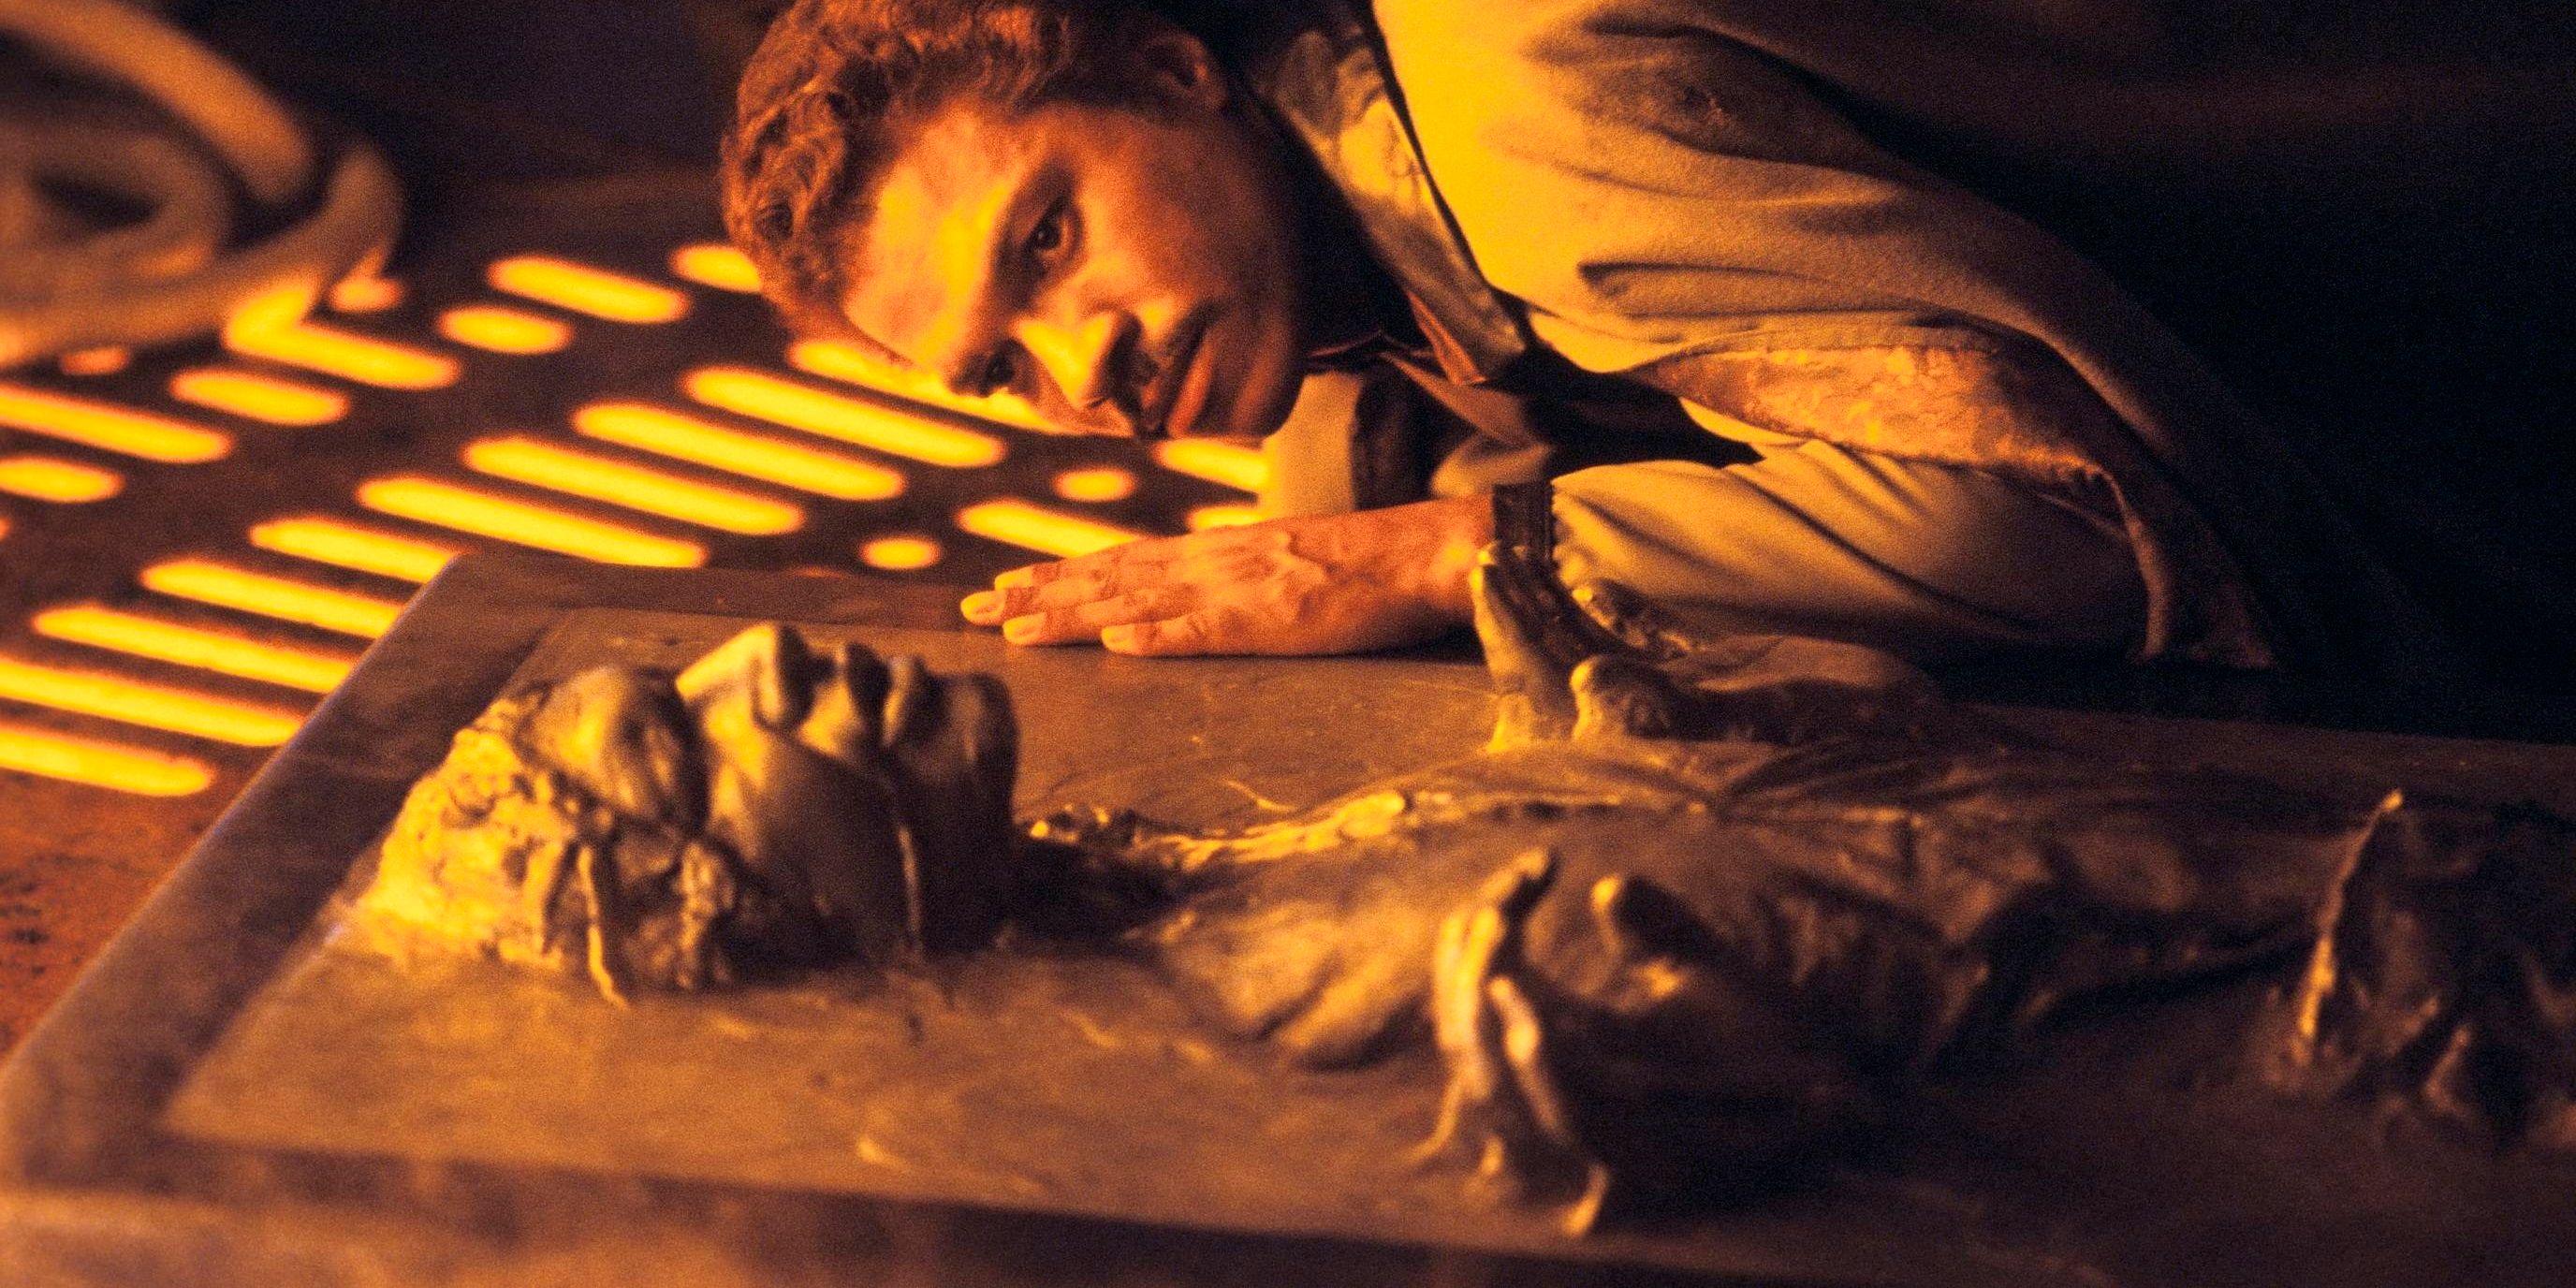 Lando Calrissian checking hjat Han Solo is alive after he is frozen in carbonite in Star Wars The Empire Strikes Back